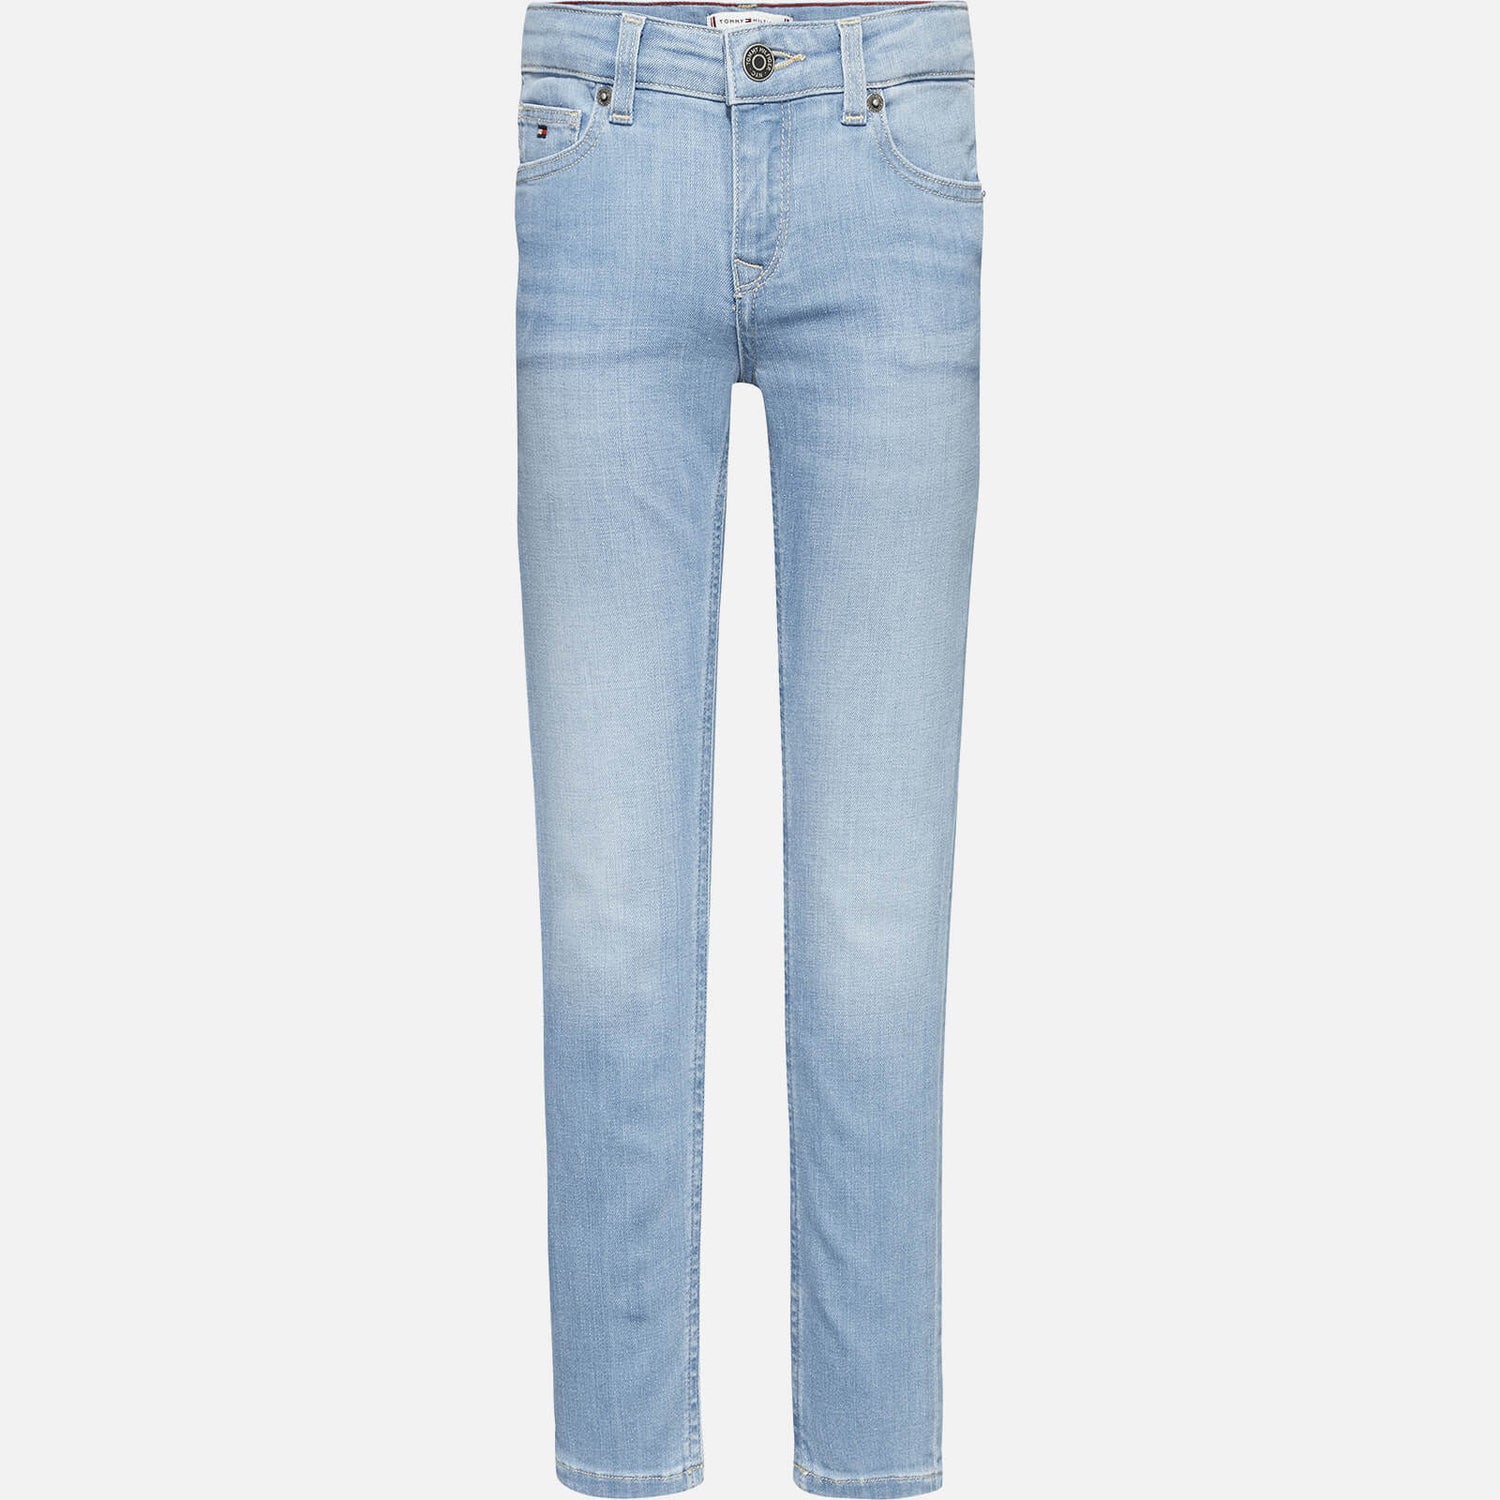 Tommy Hilfiger Girls' Nora Skinny Jeans - Corsshatch - 7 Years